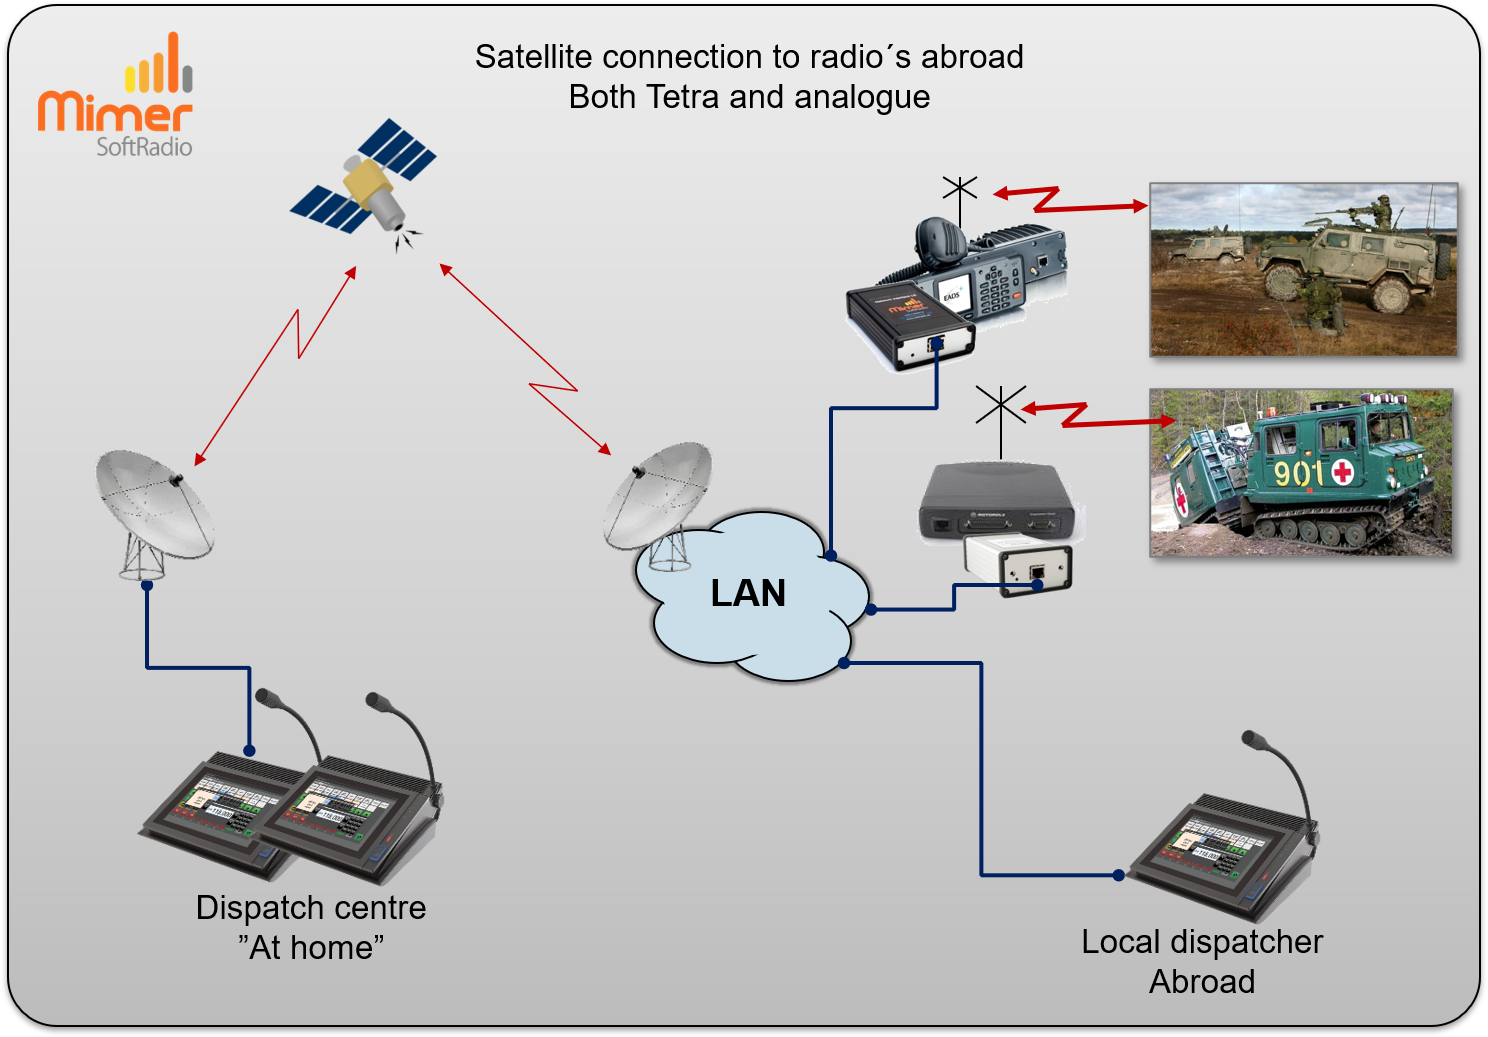 Operators both local and connected over satellite working with several radio types